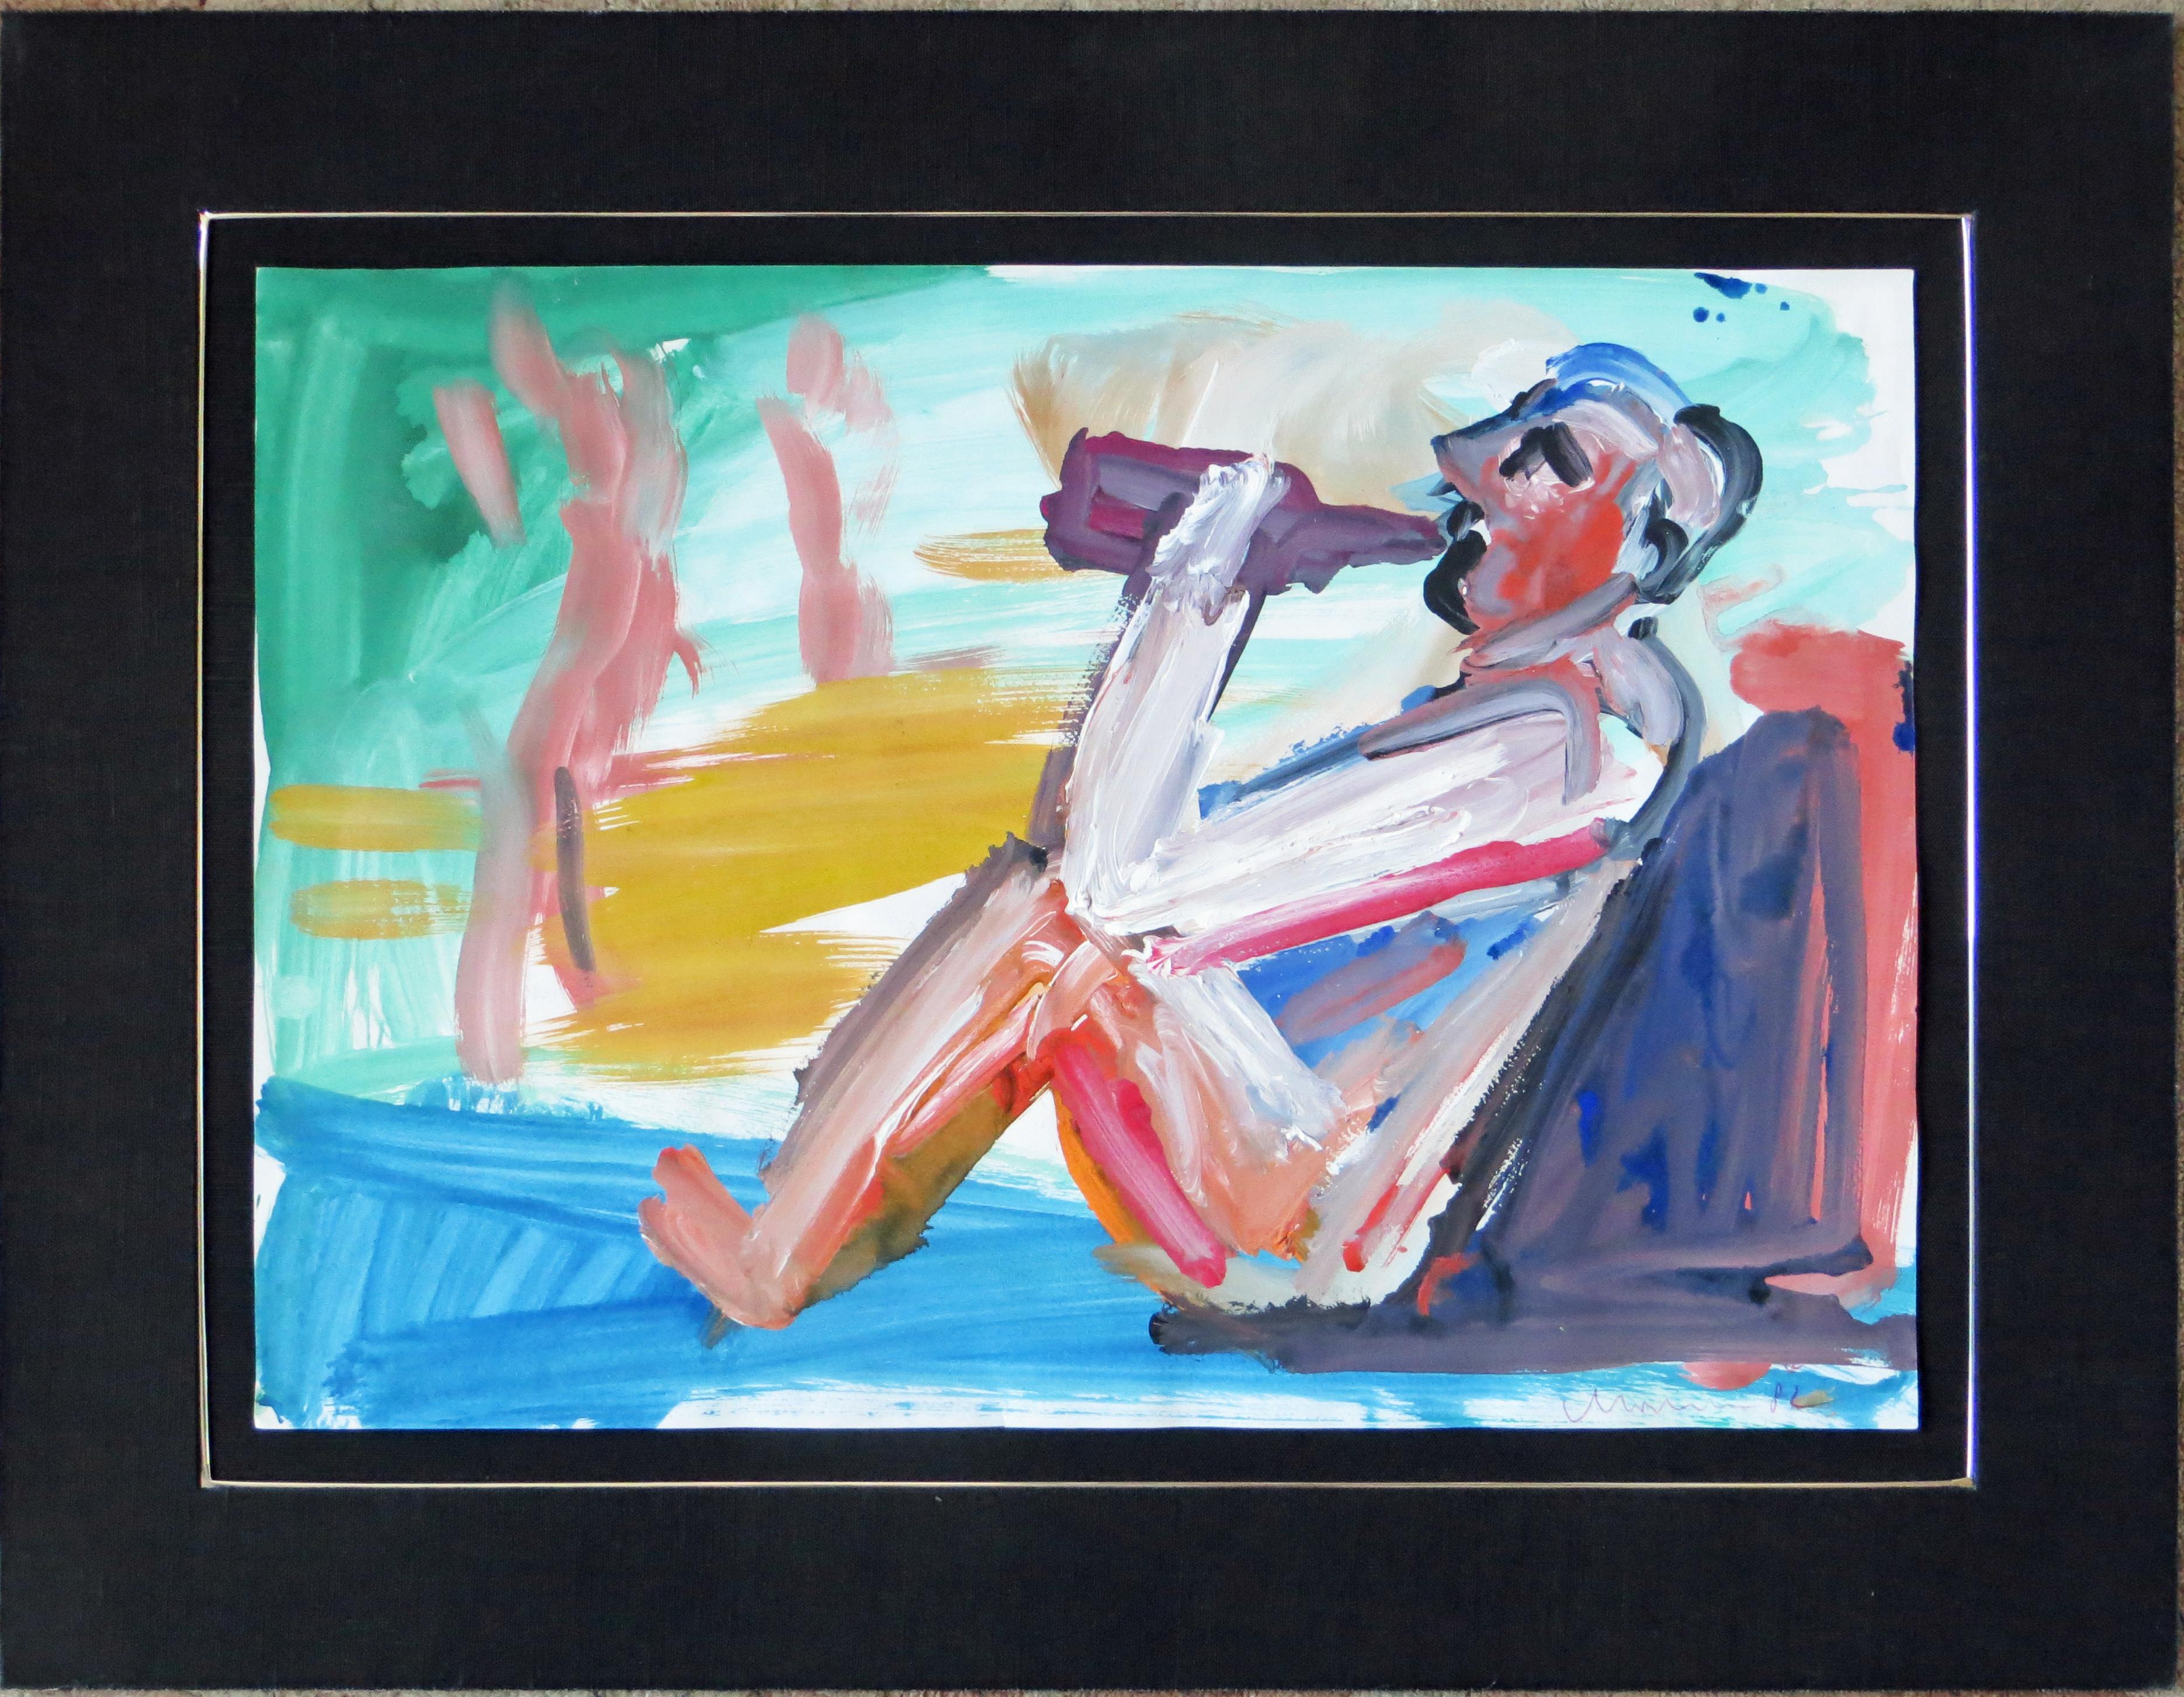 Artist: Alois Mosbacher– Austrian (1954- )
Title: Figure Drinking from Bottle
Year: 1982
Medium: Mixed Media – Acrylic and watercolor on paper
Size: 16.75 x 24 inches (42.5 x 61 cm) 
Matted size: 24 x 31.25 inches (61 x 79.5 cm)
Signature: Signed,